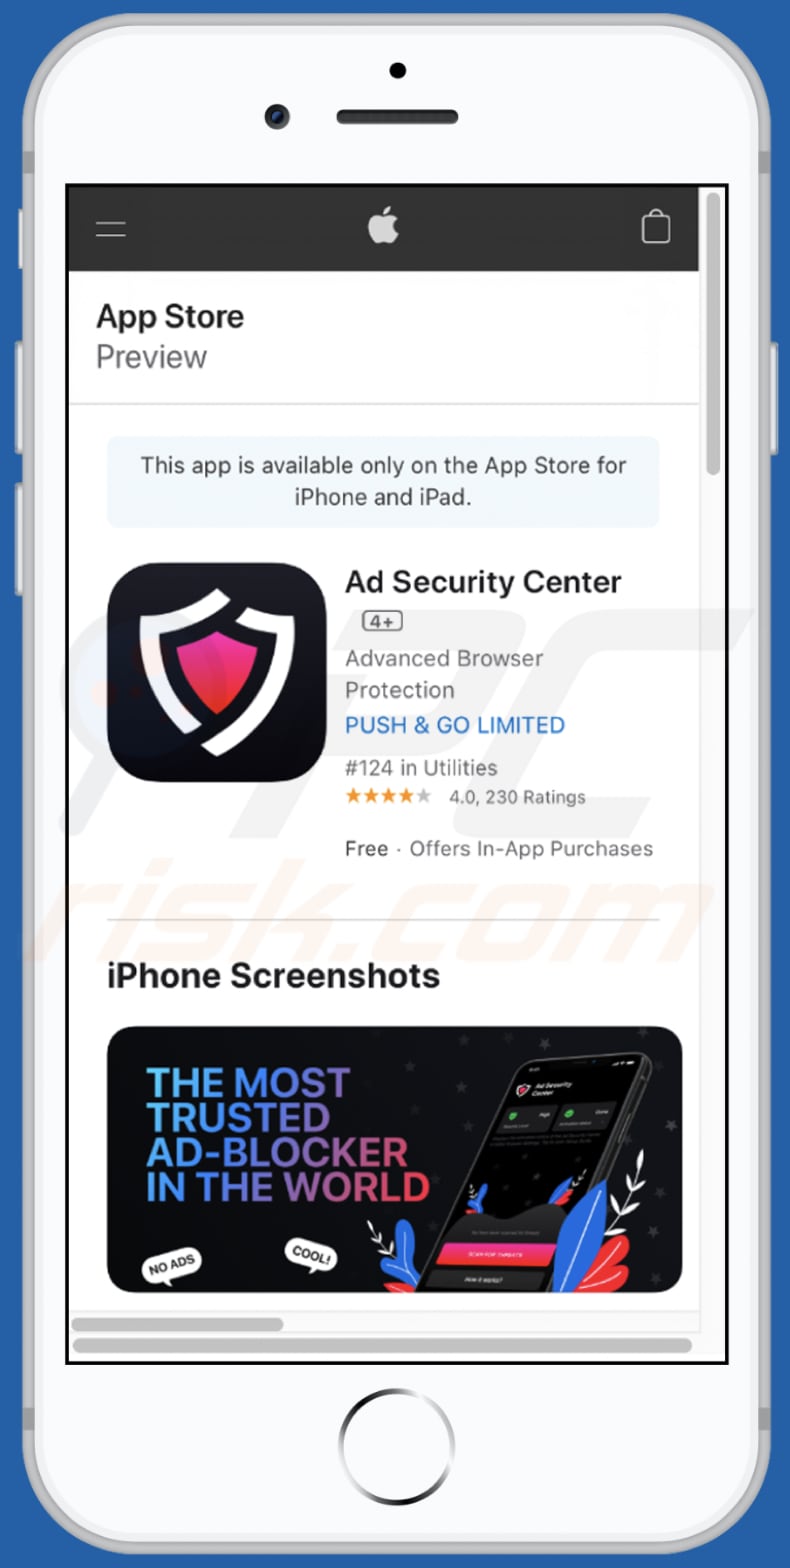 application-update.com promotes Ad Security Center